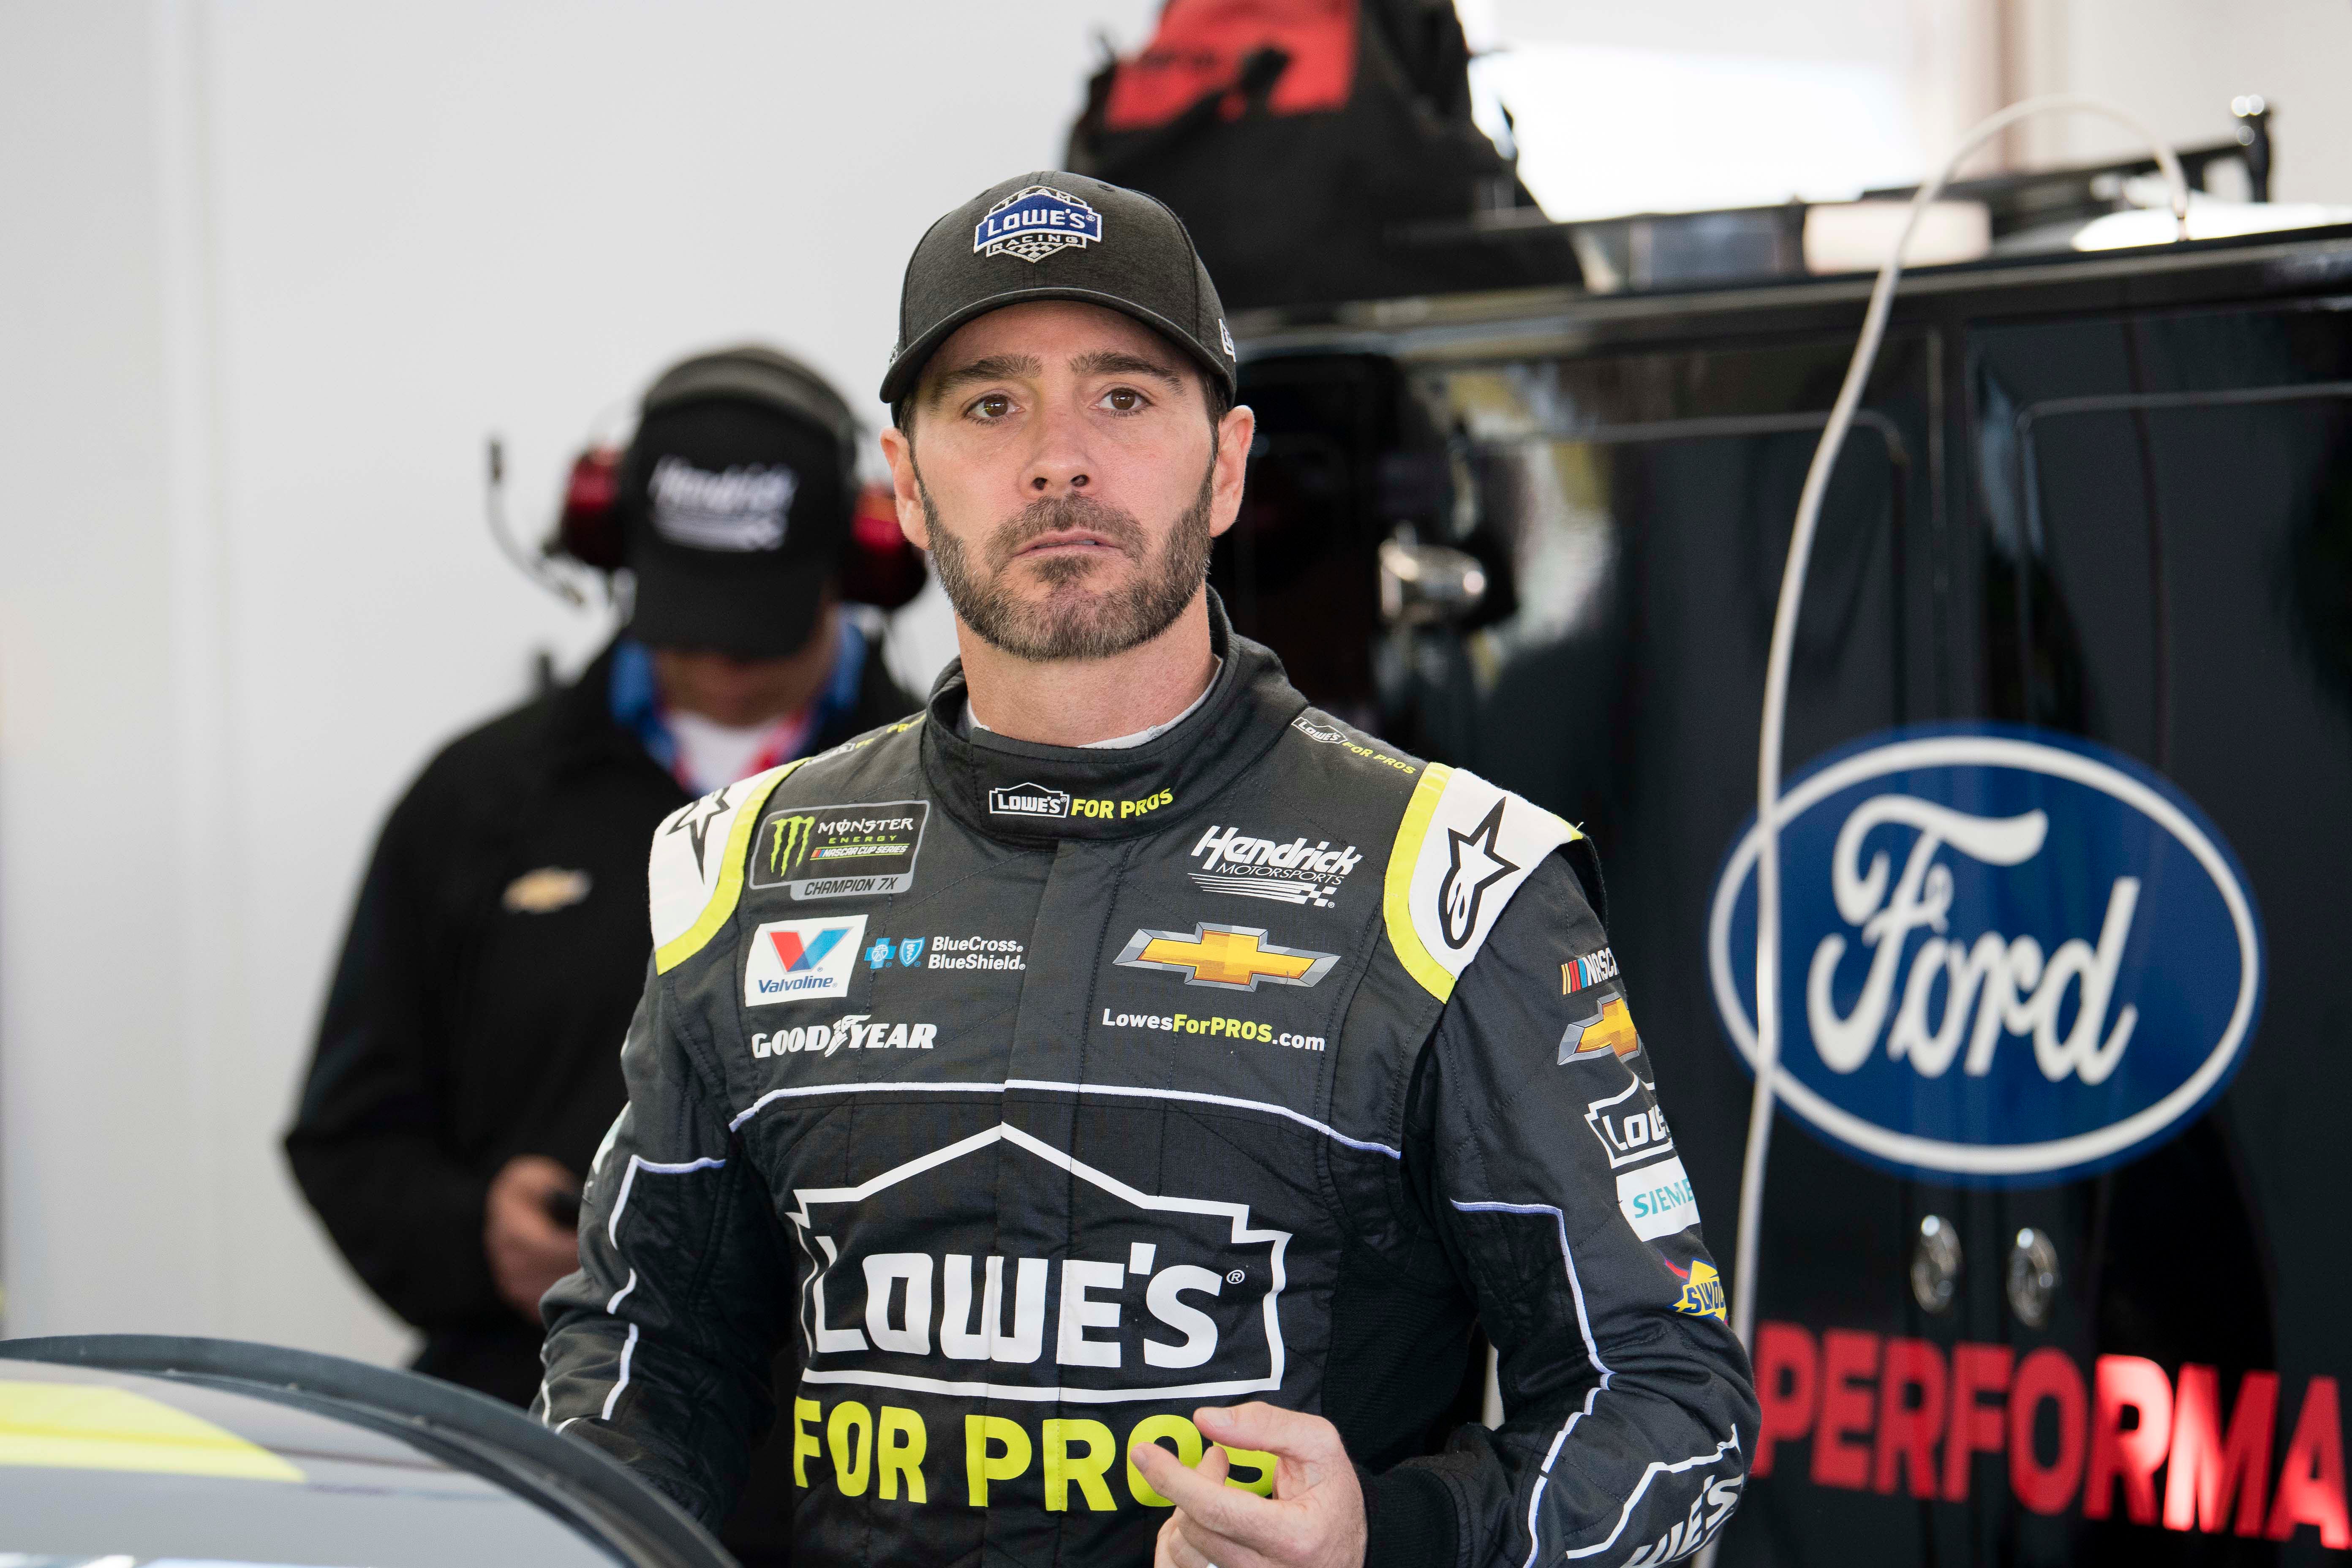 Seven-time NASCAR champ Jimmie Johnson looks to get back on track at Martin...